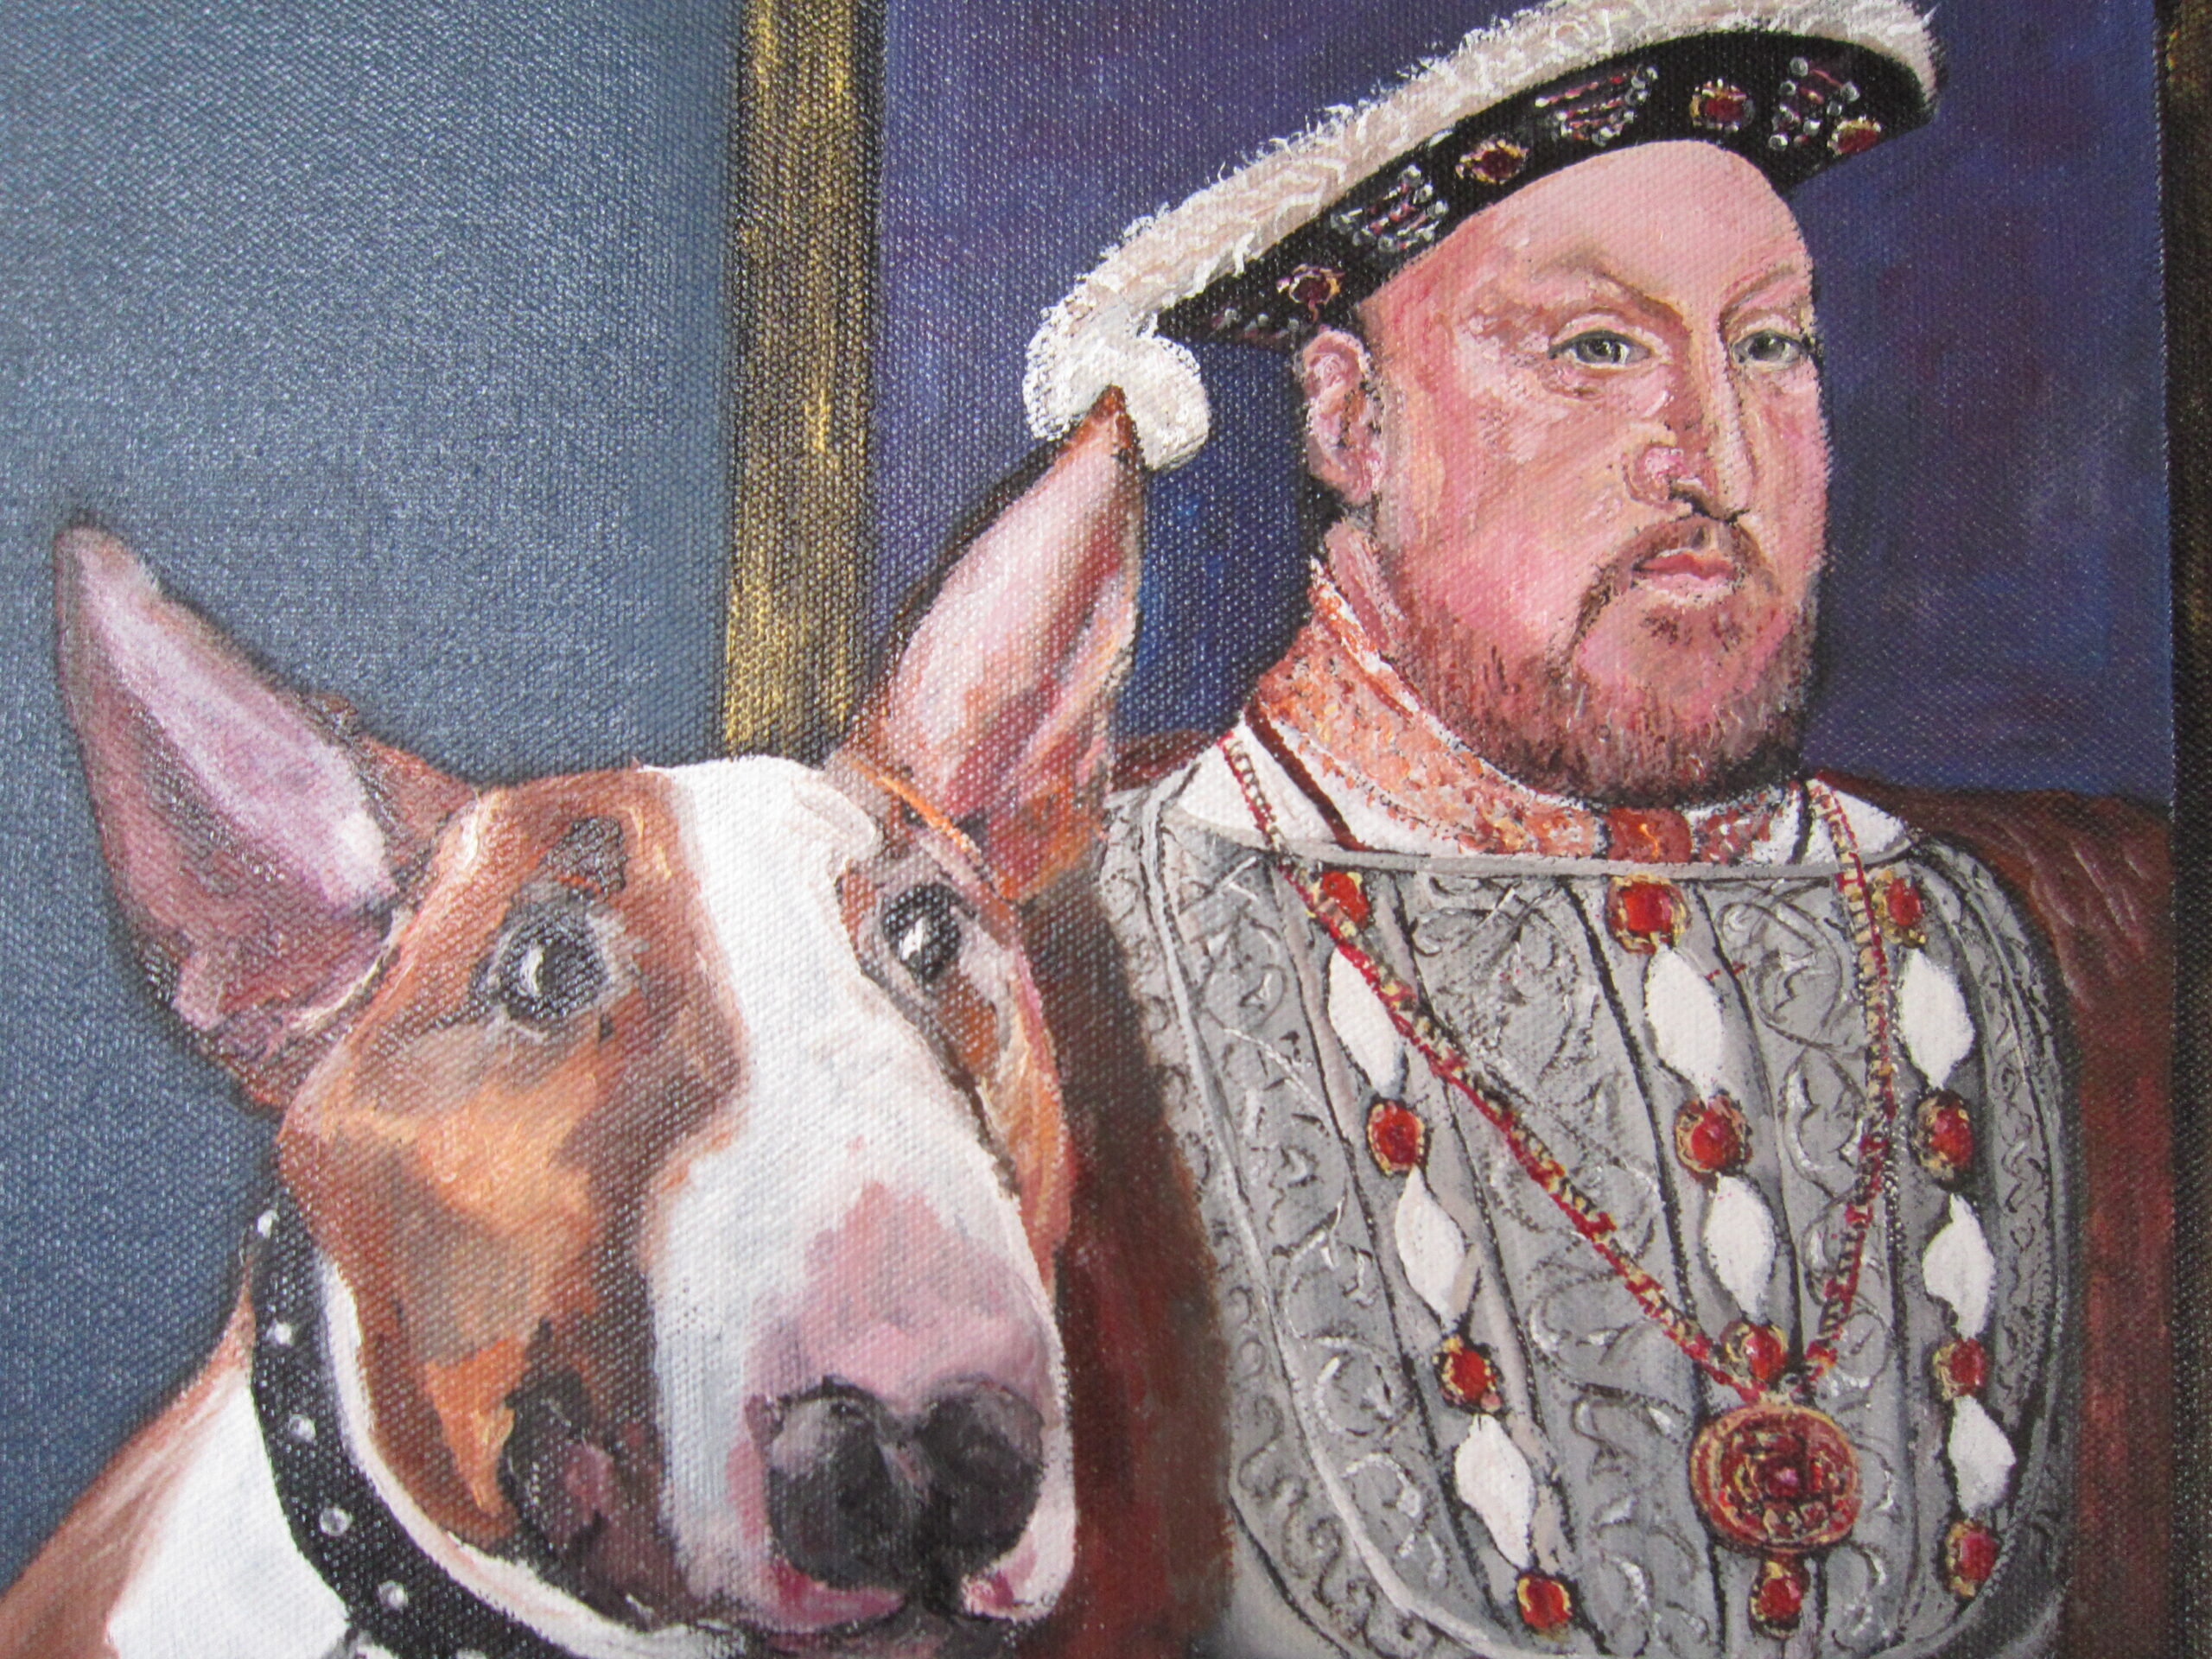 Dog and King Henry by Katherine Tyson in her Artist Profile